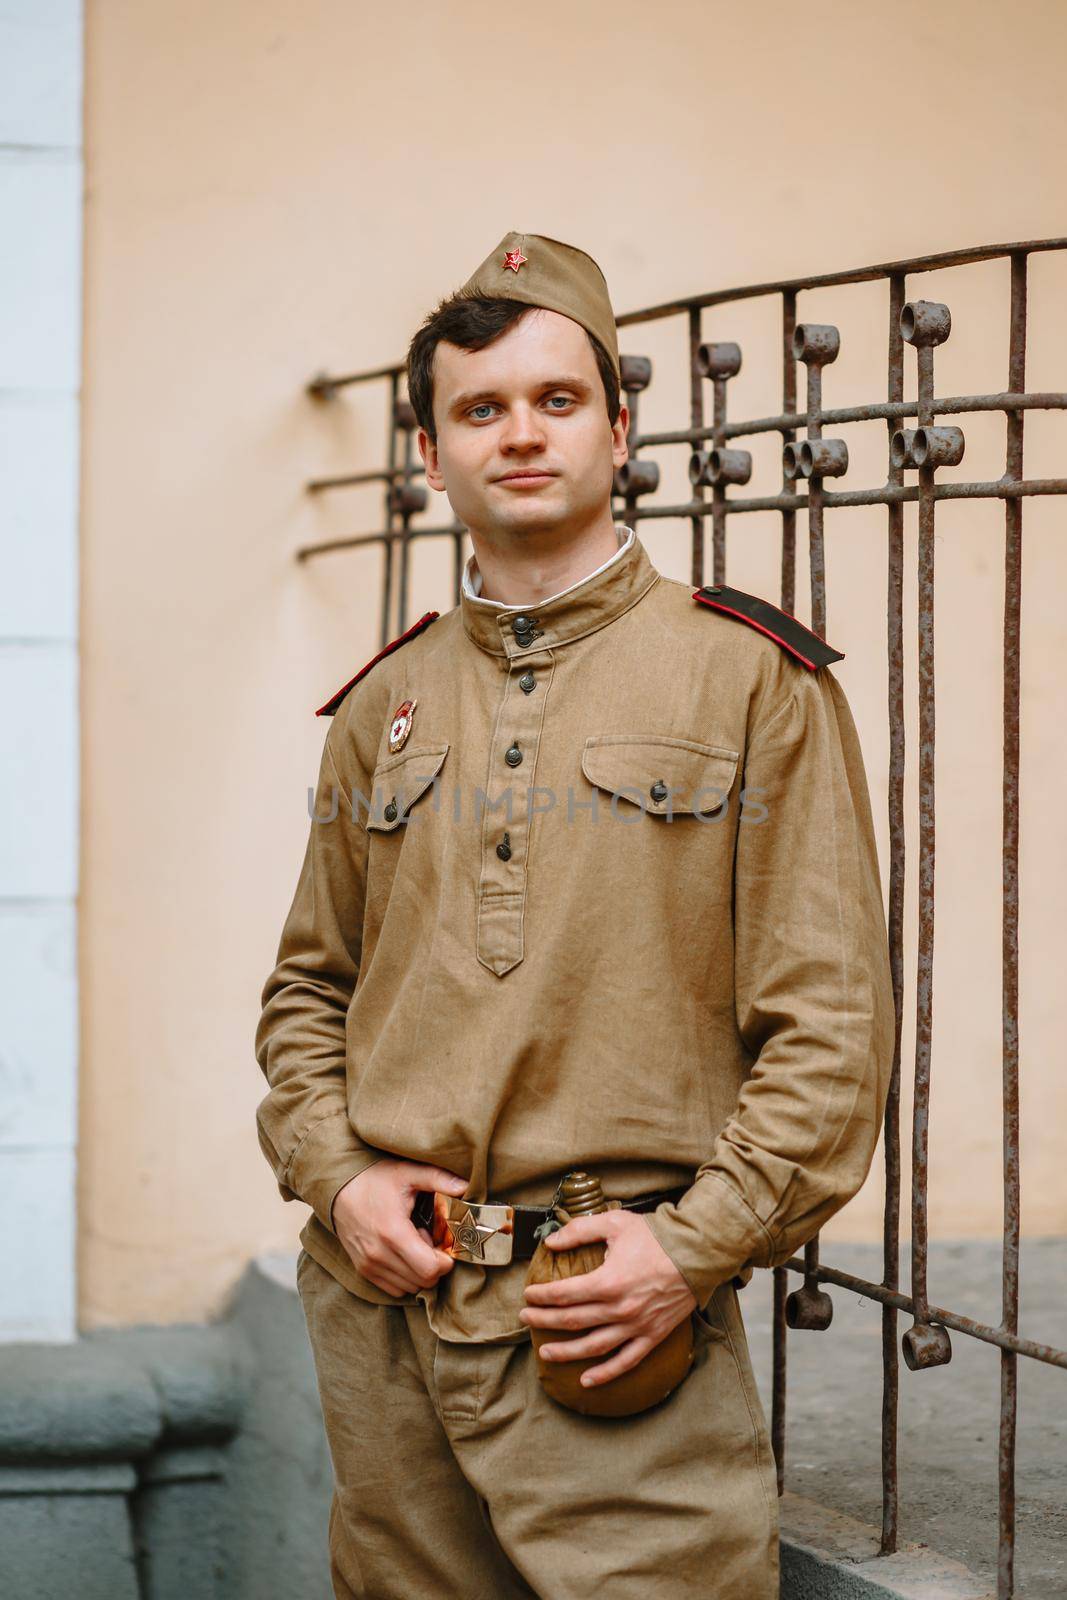 A man in a Soviet uniform from world war II. The soldier is standing against the yellow wall, holding his belt with his hands. Serious face